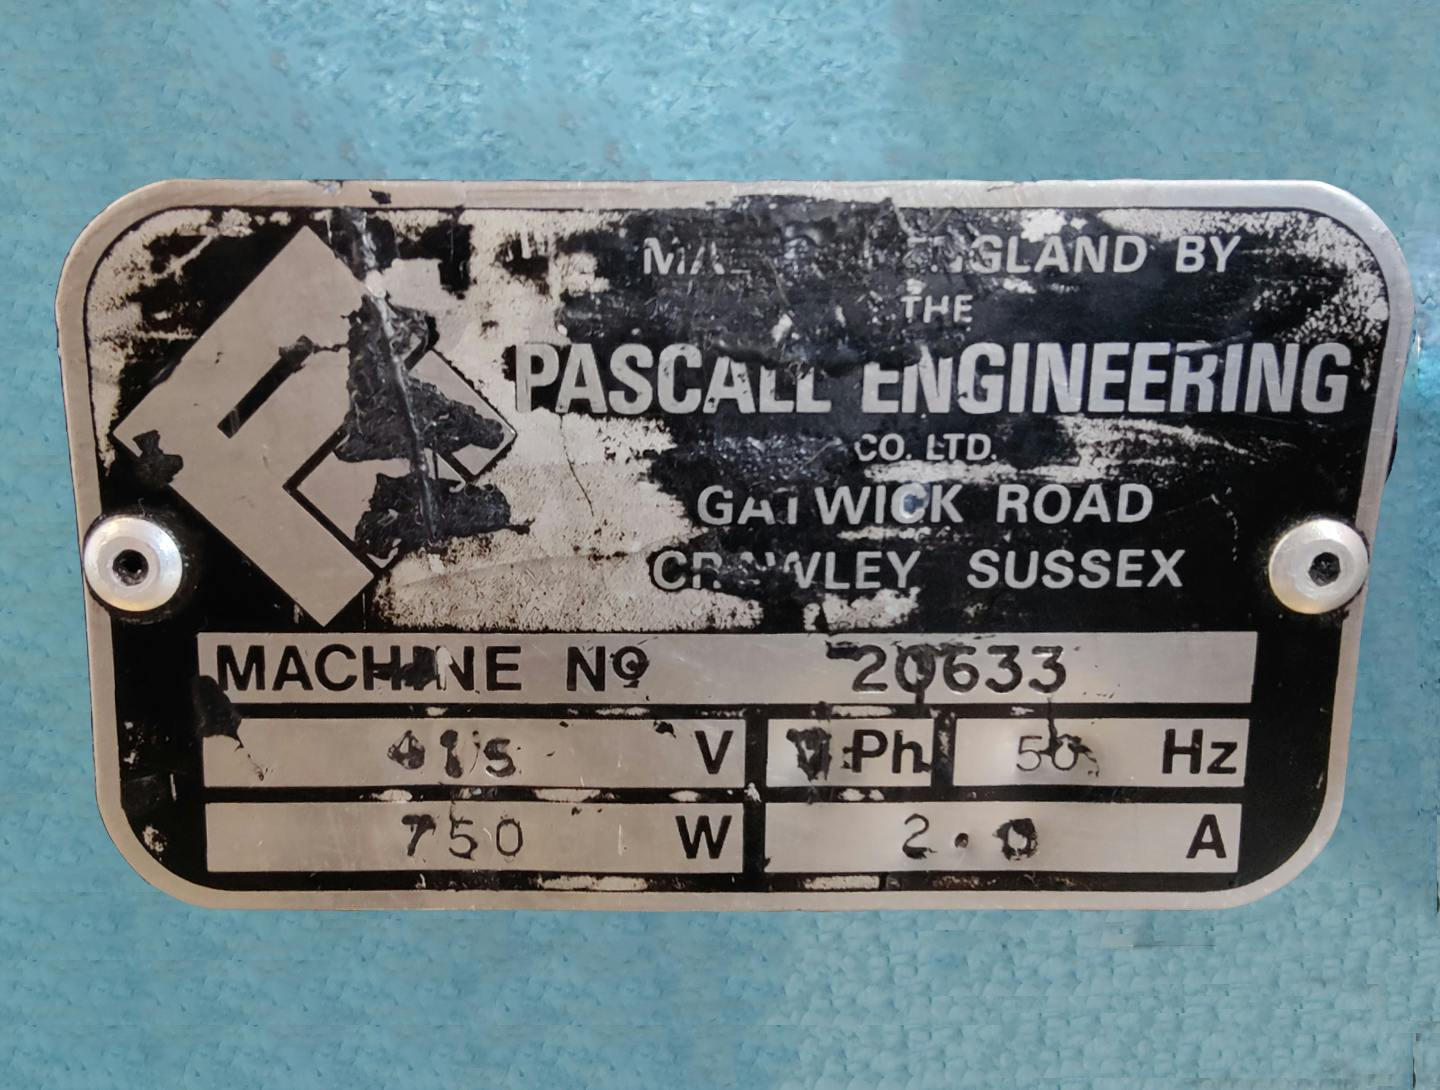 Pascall Engineering Model 2 - Driewals - image 10